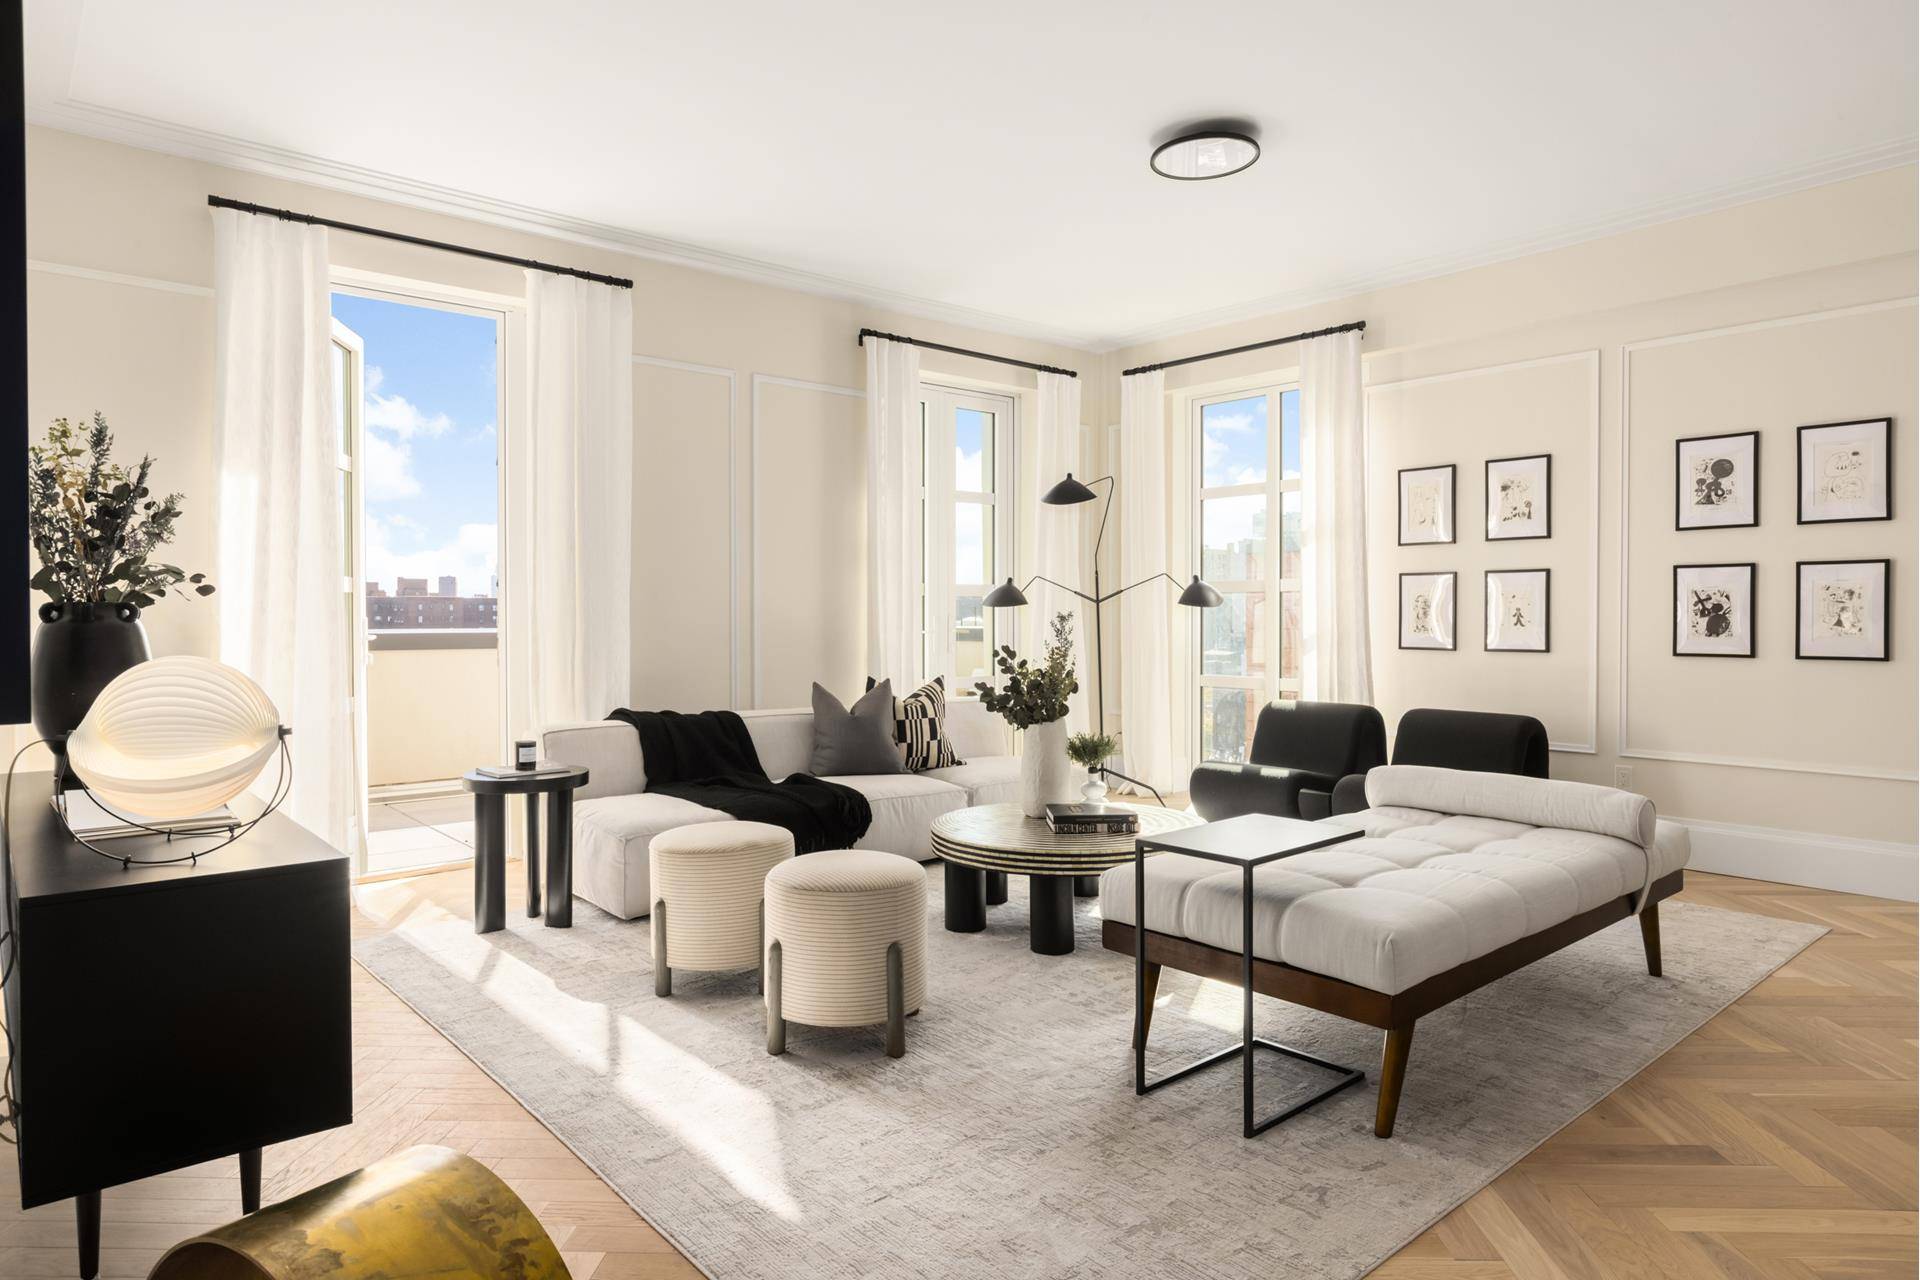 DESIGNER 4 BR WITH MASSIVE GREAT ROOM With interiors designed by the celebrated Paris Forino, Residence 11B at 250 East 21st Street is a 2, 468 square foot four bedroom, ...